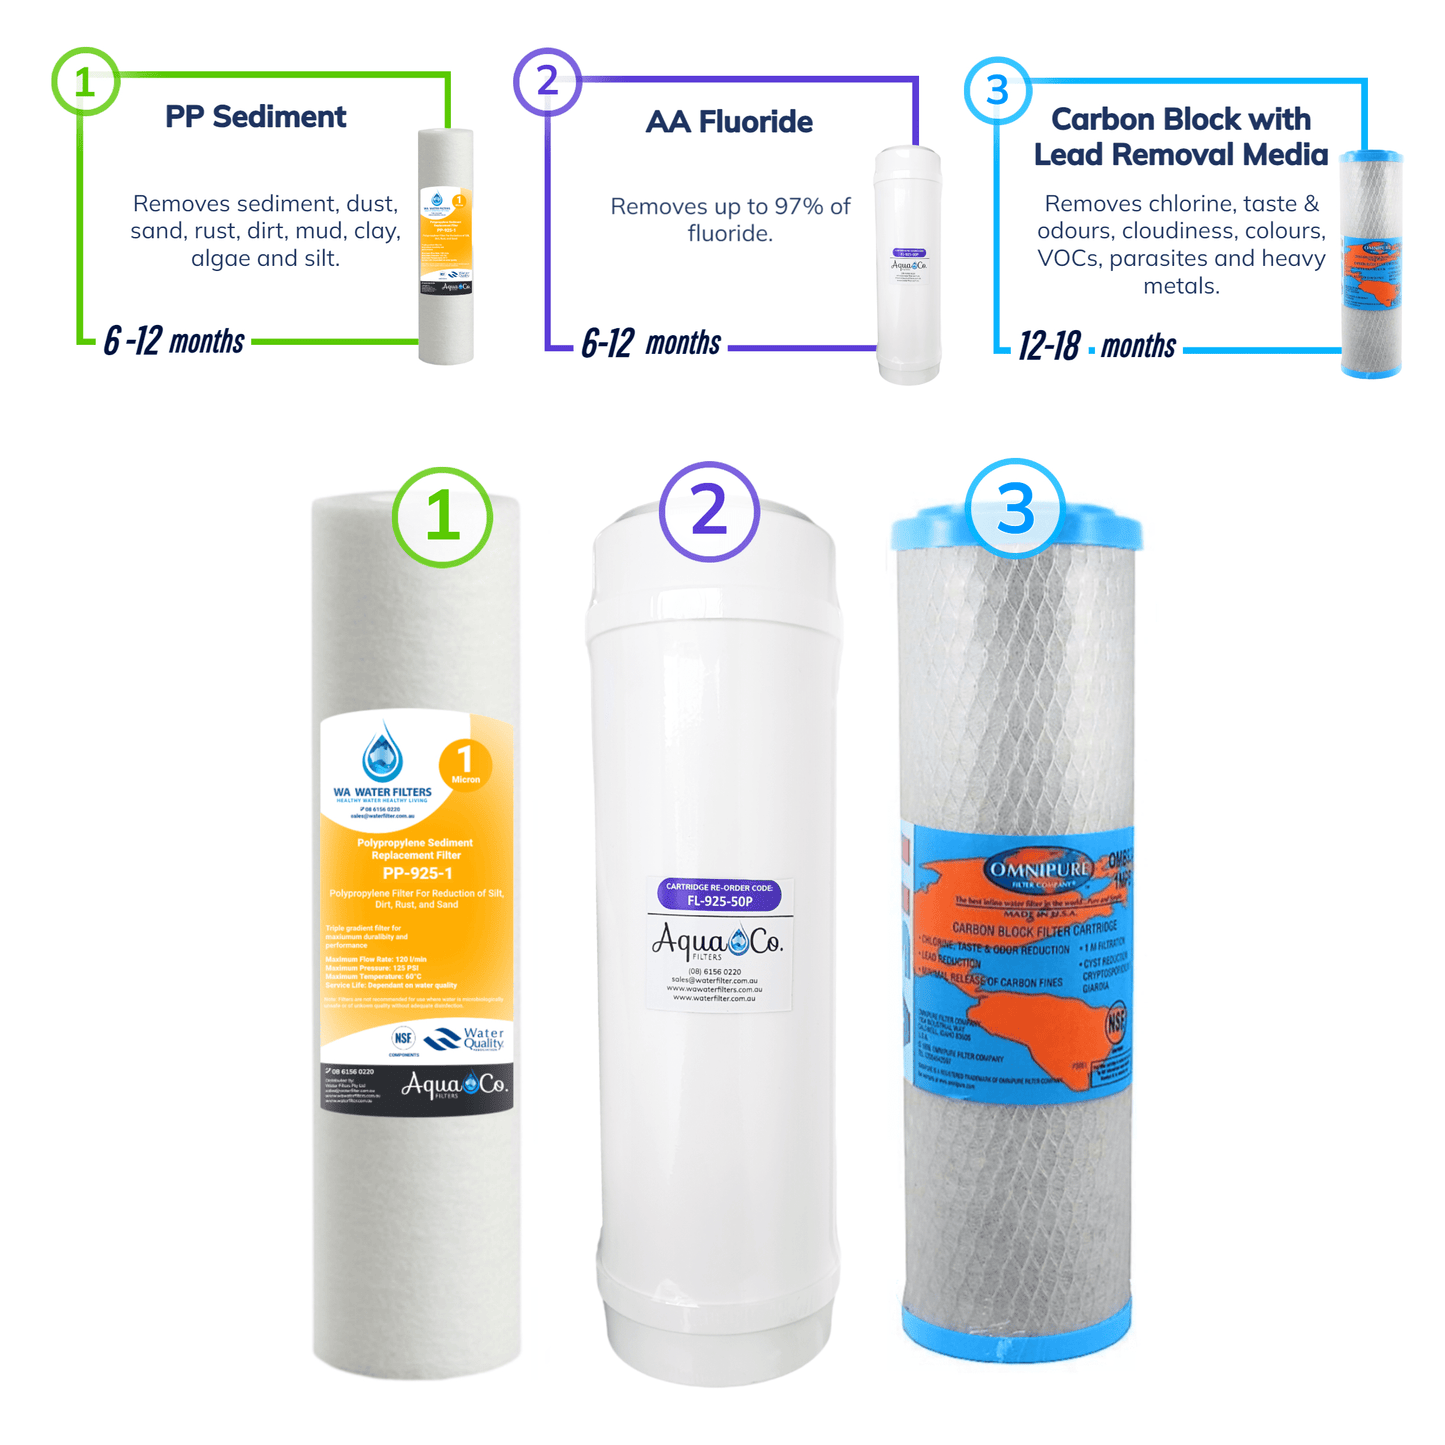 AquaCo 9" x 2.5" Sediment, Fluoride and Carbon Replacement Filters - REP-925SFC - Reduce Sediments, Chlorine, Taste, Odours, Parasites, Lead and Fluorides